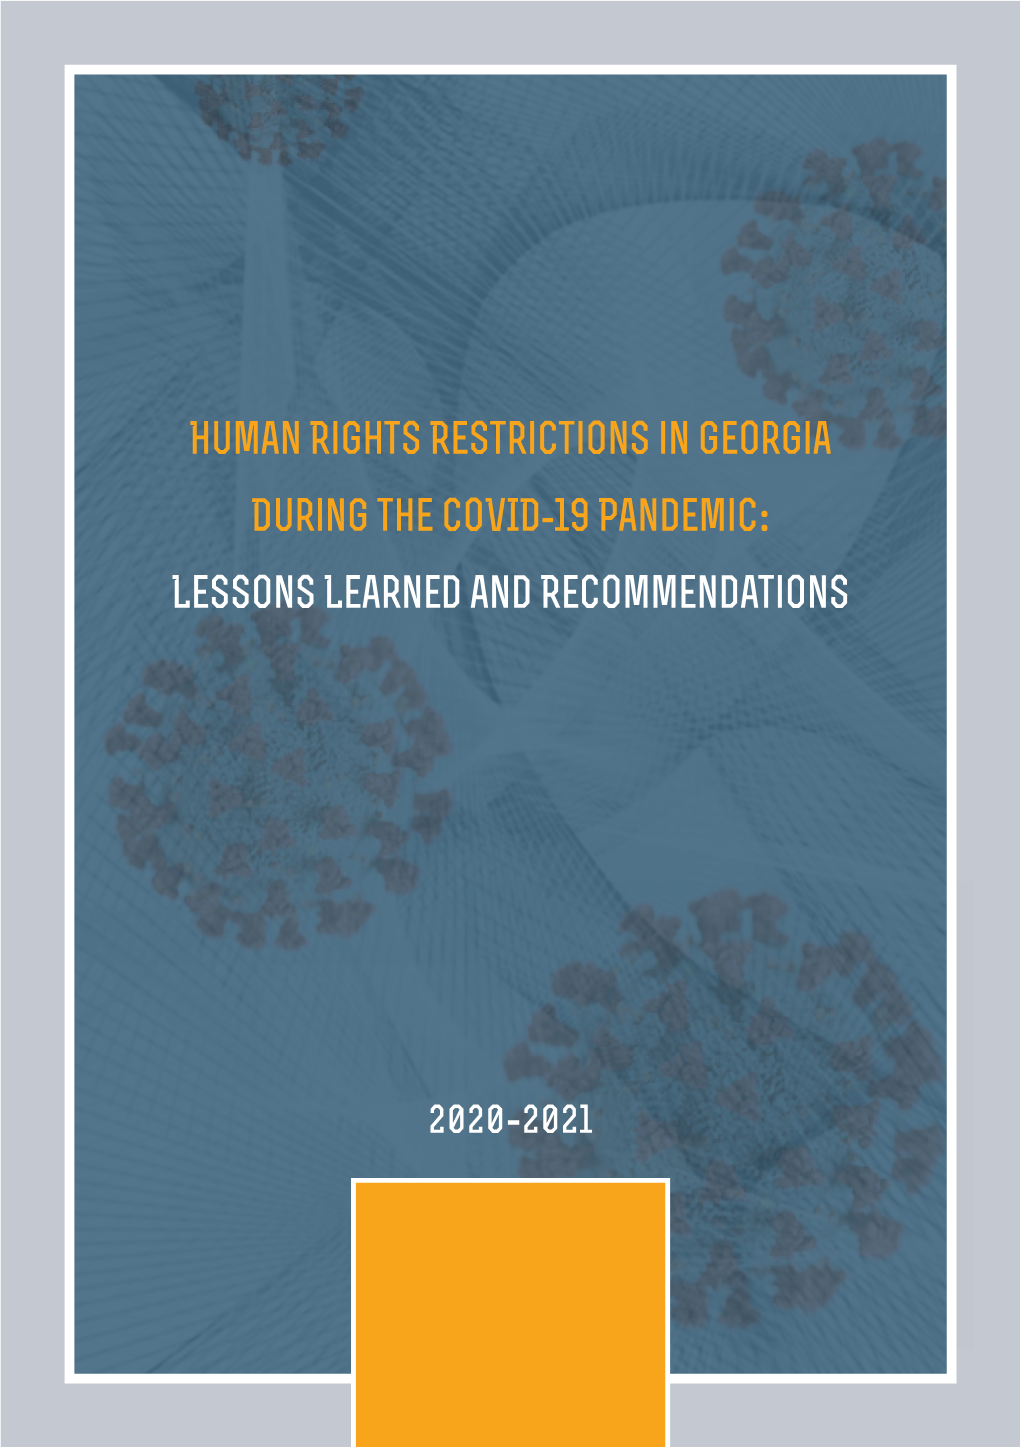 Human Rights Restrictions in Georgia During the COVID-19 Pandemic: Lessons Learned and Recommendations